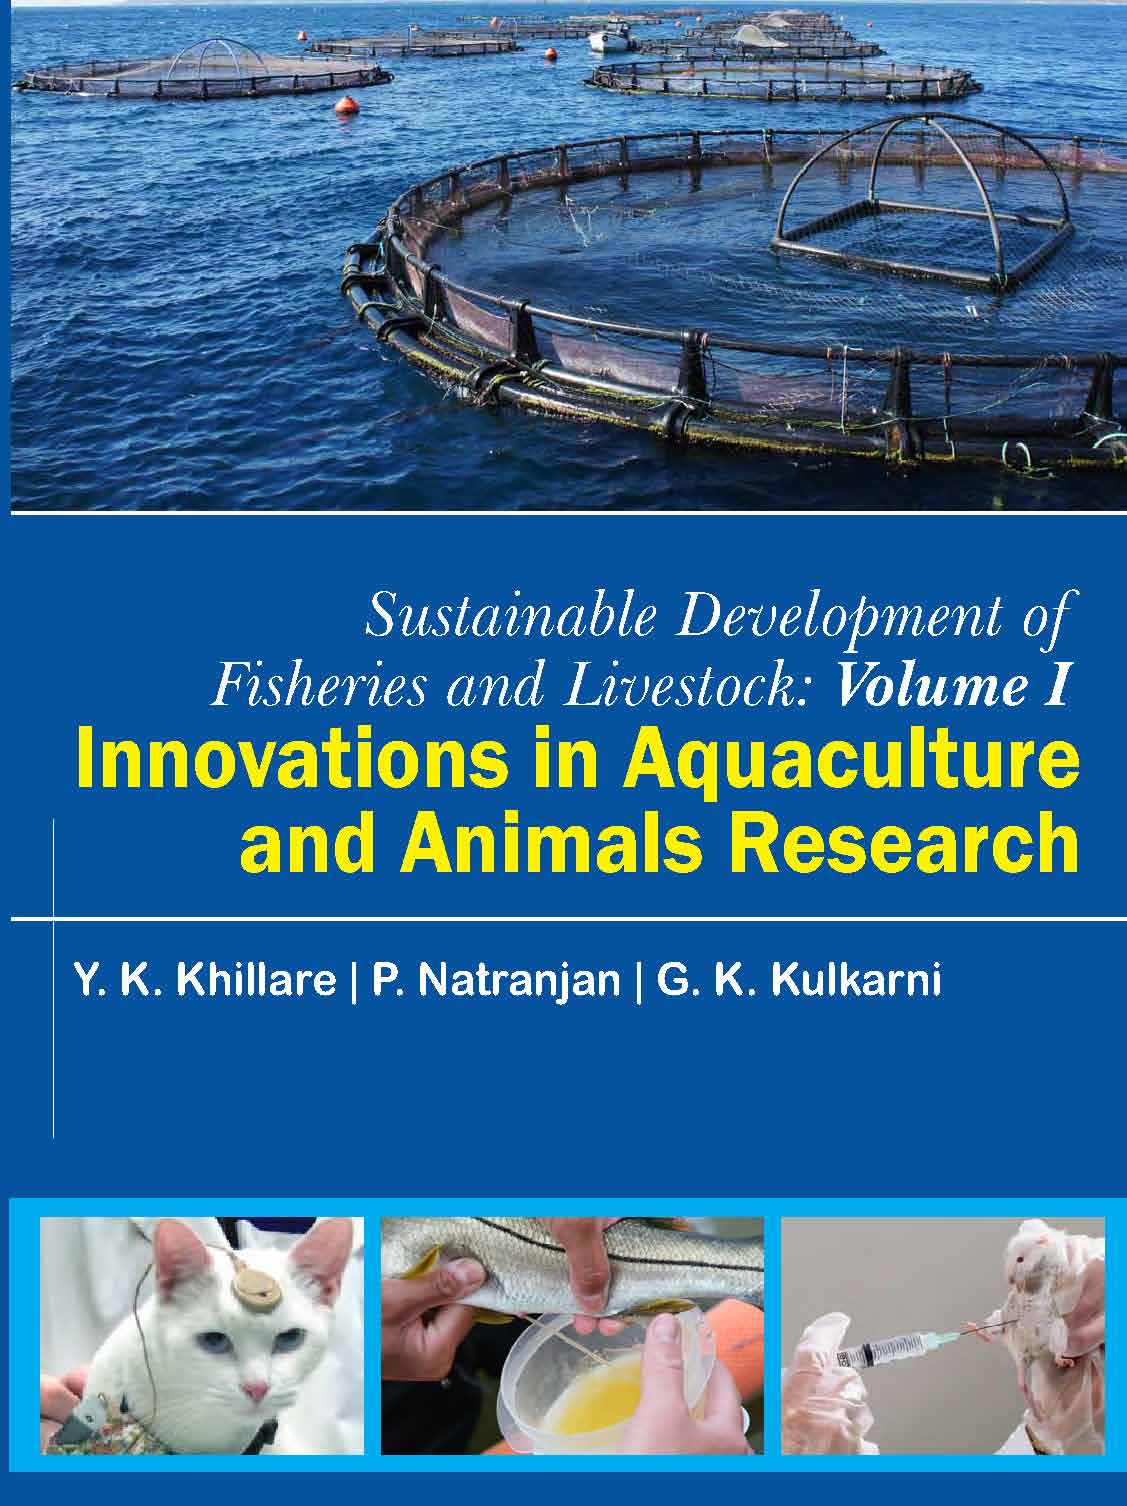 research in agriculture livestock and fisheries